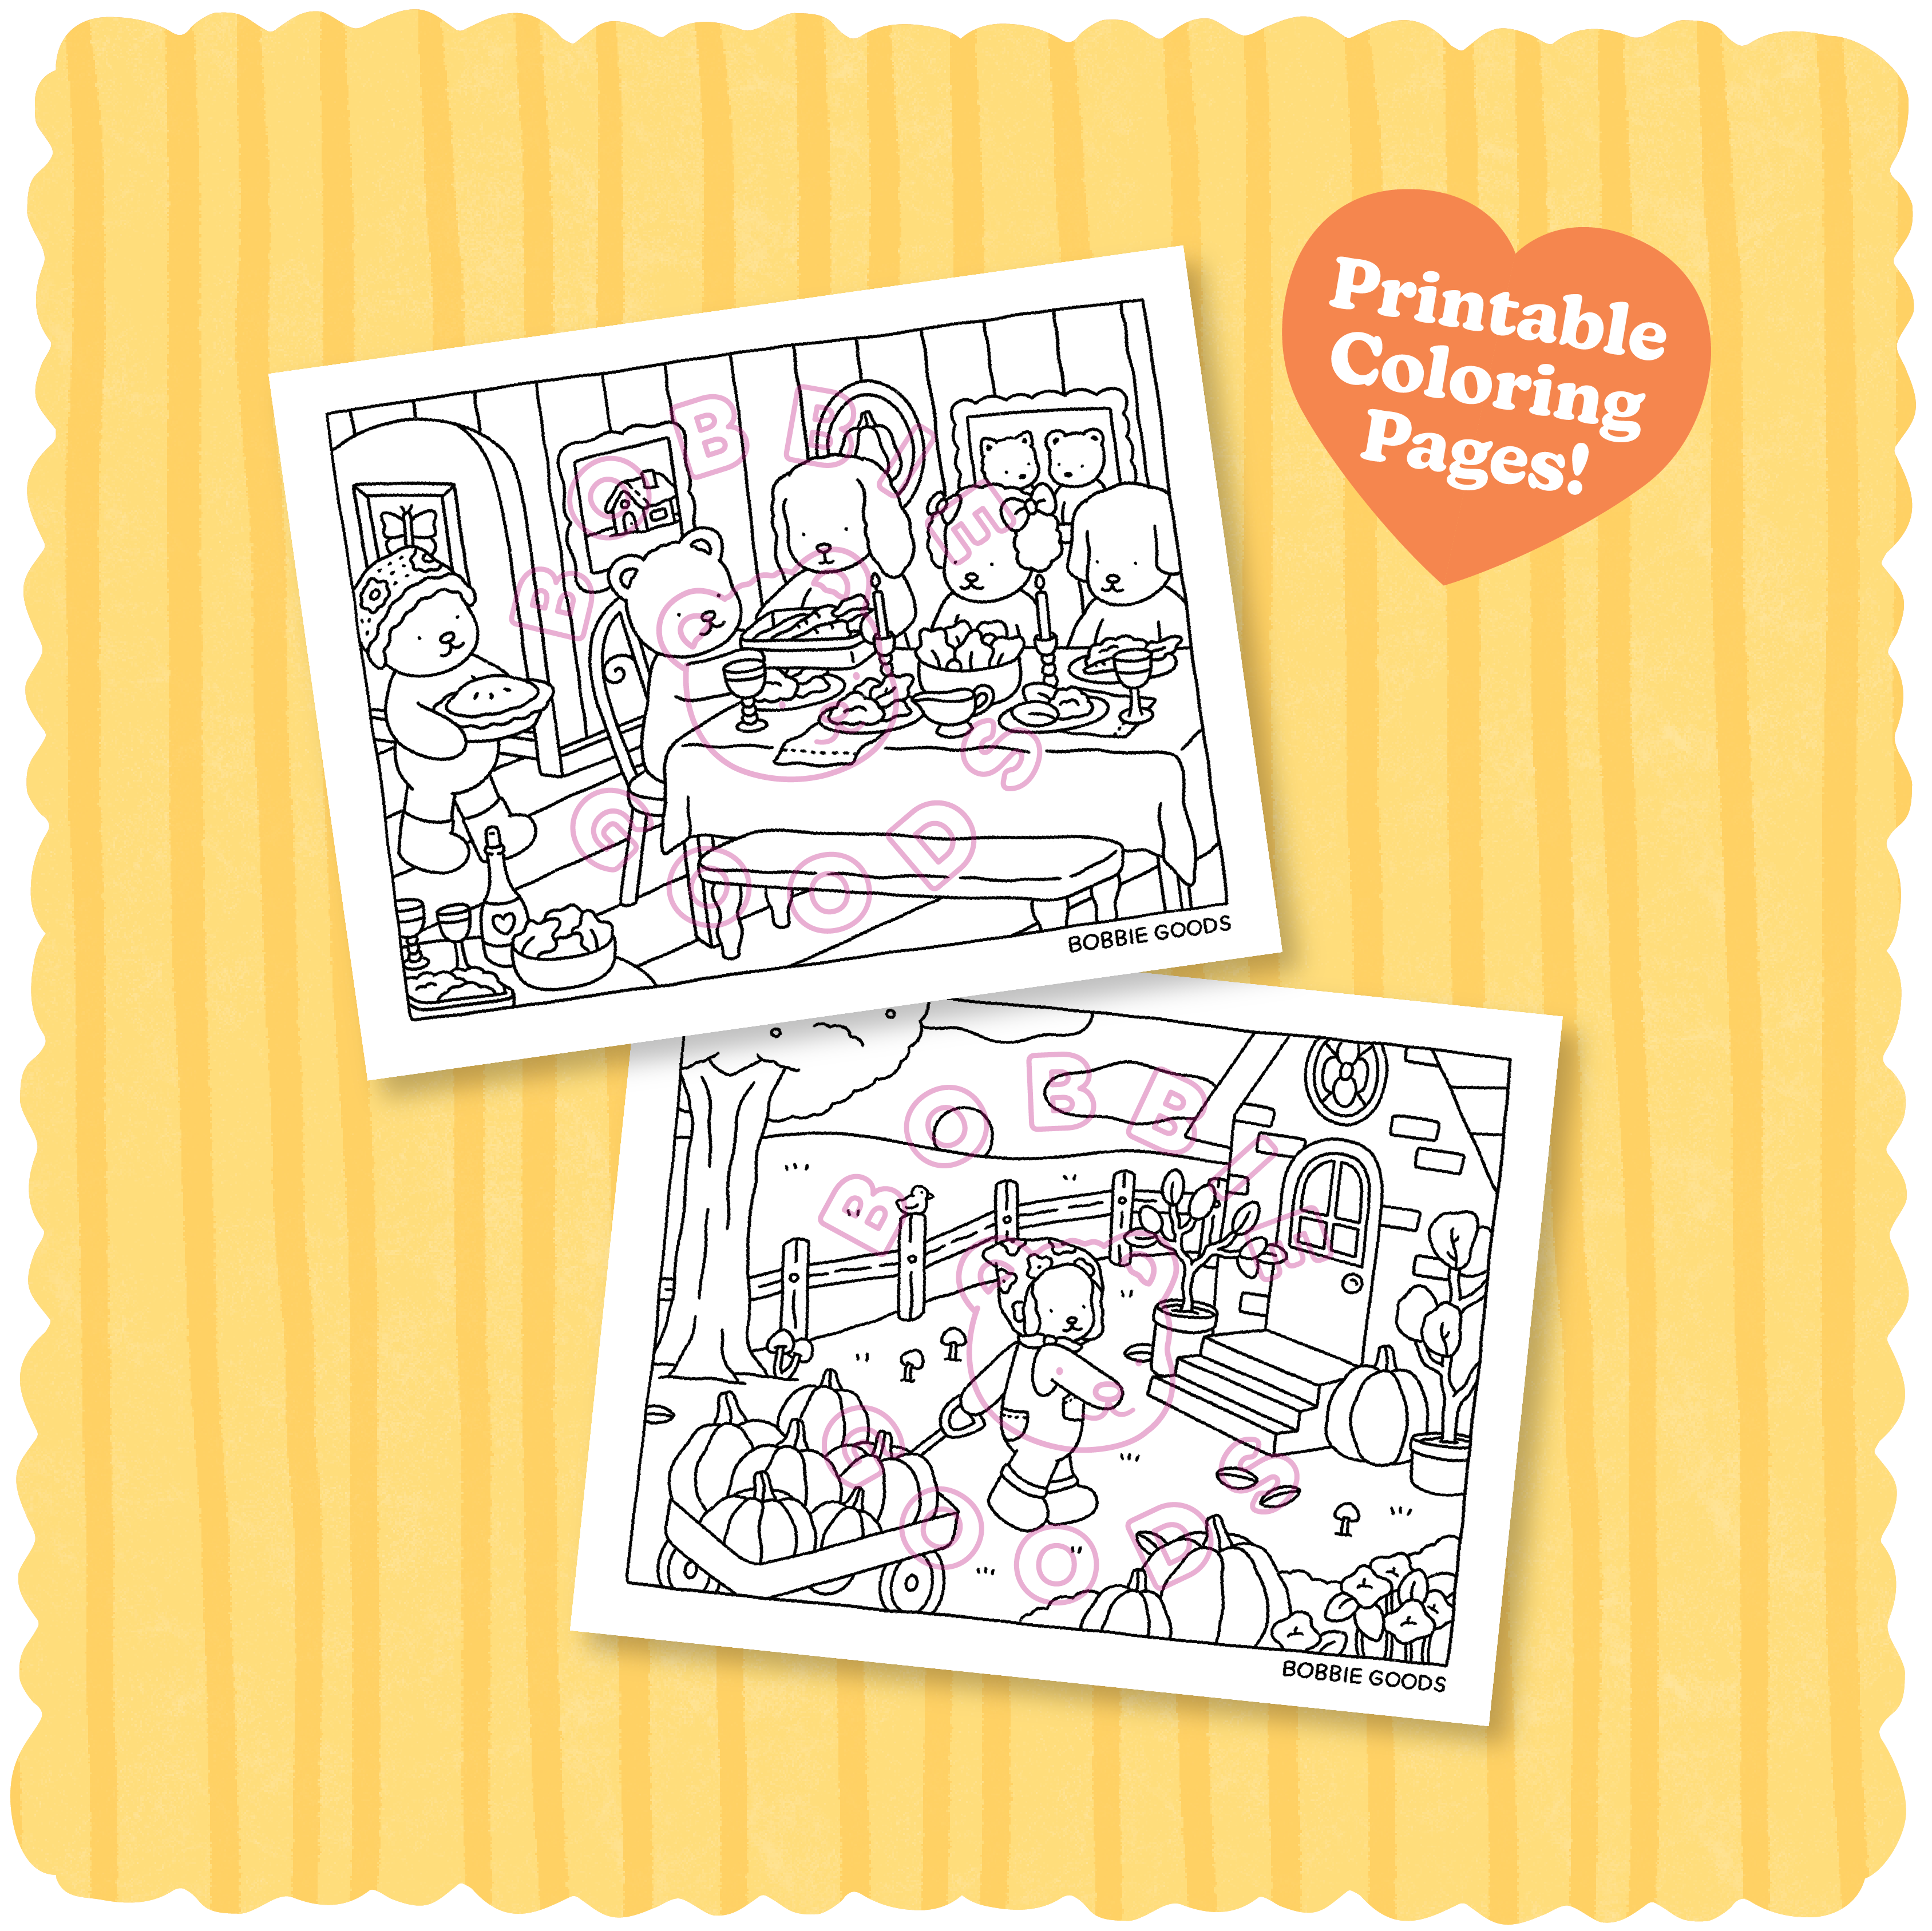 Bobbie Goods Coloring Pages  Coloring pages, Detailed coloring pages,  Coloring book art